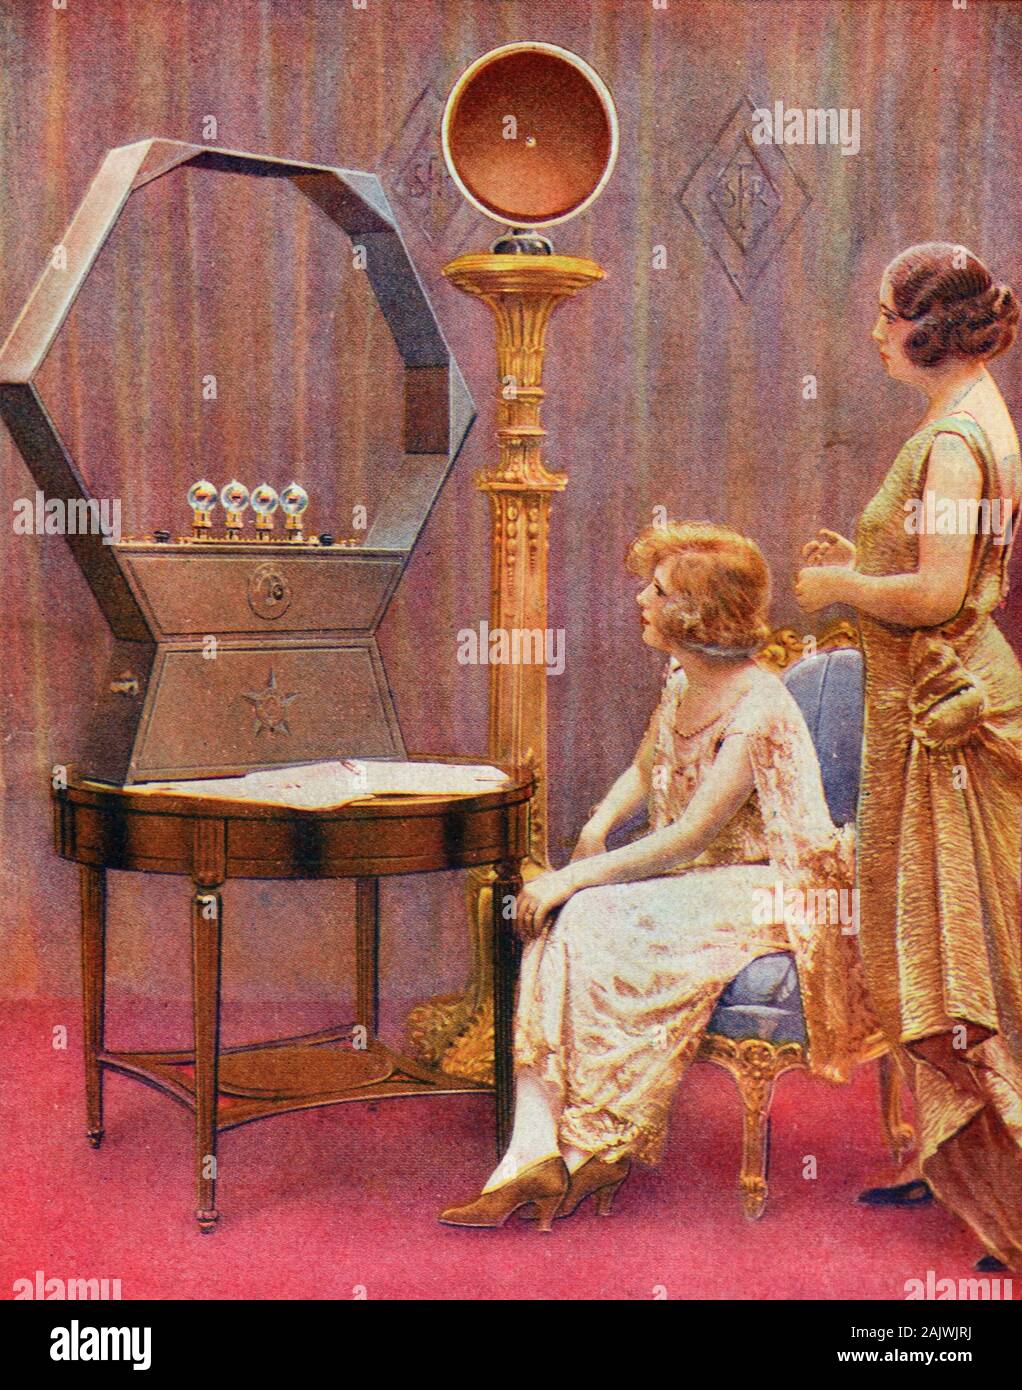 Old Advert, Advertisement or Publicity for Early Cordless Telephone & European Flapper Women in 1920s Interior with Art Deco Furniture 1923 Stock Photo